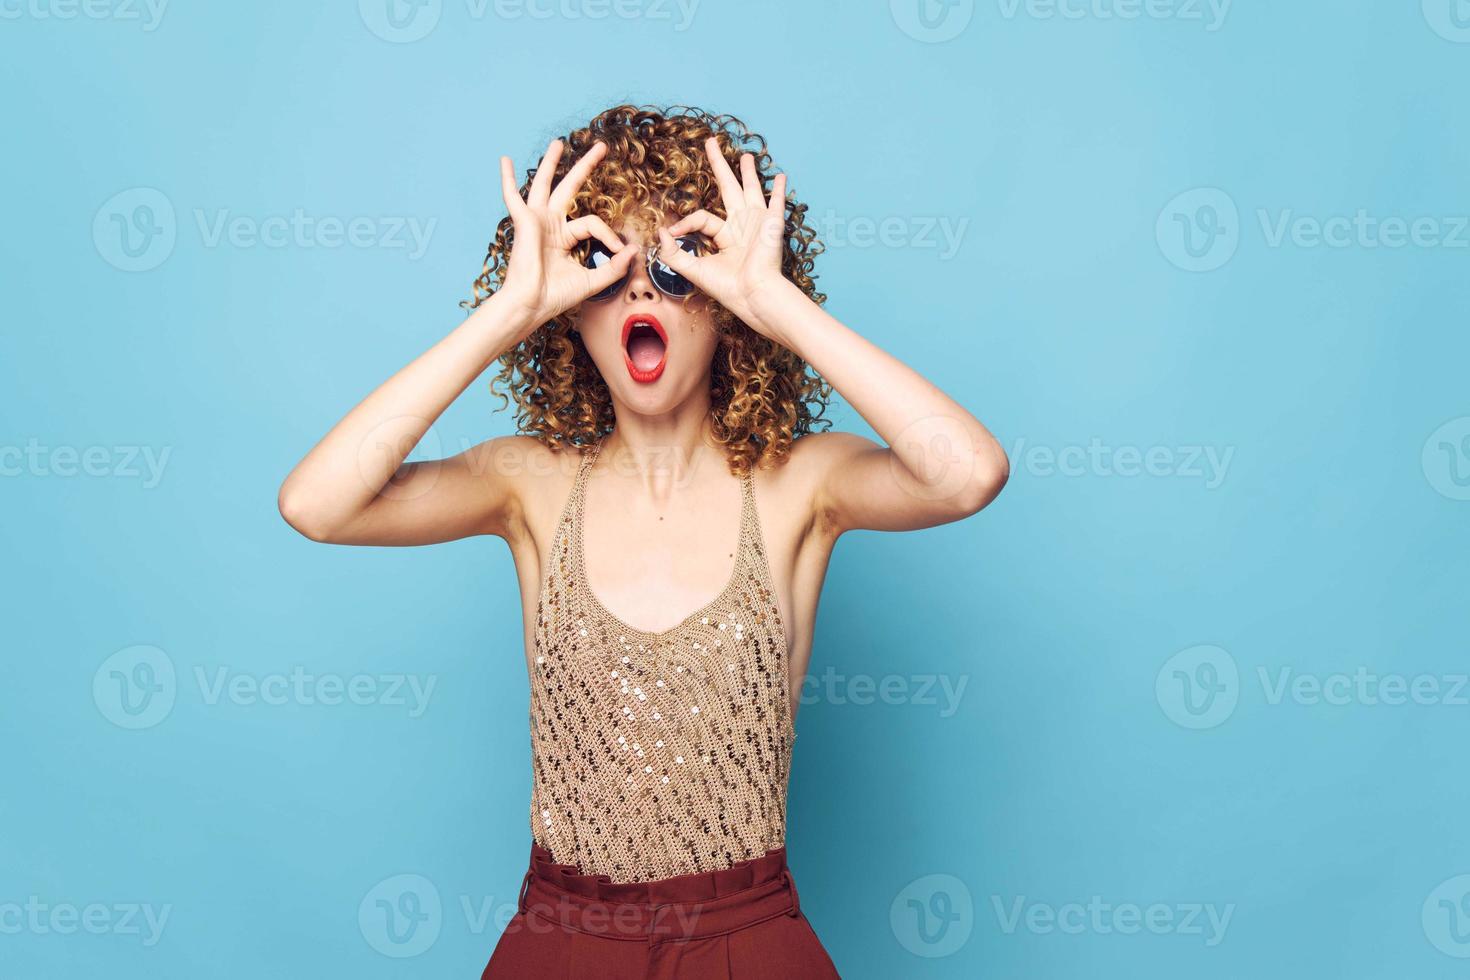 woman Surprise gestures with hands near curly hair face sequin shirt photo